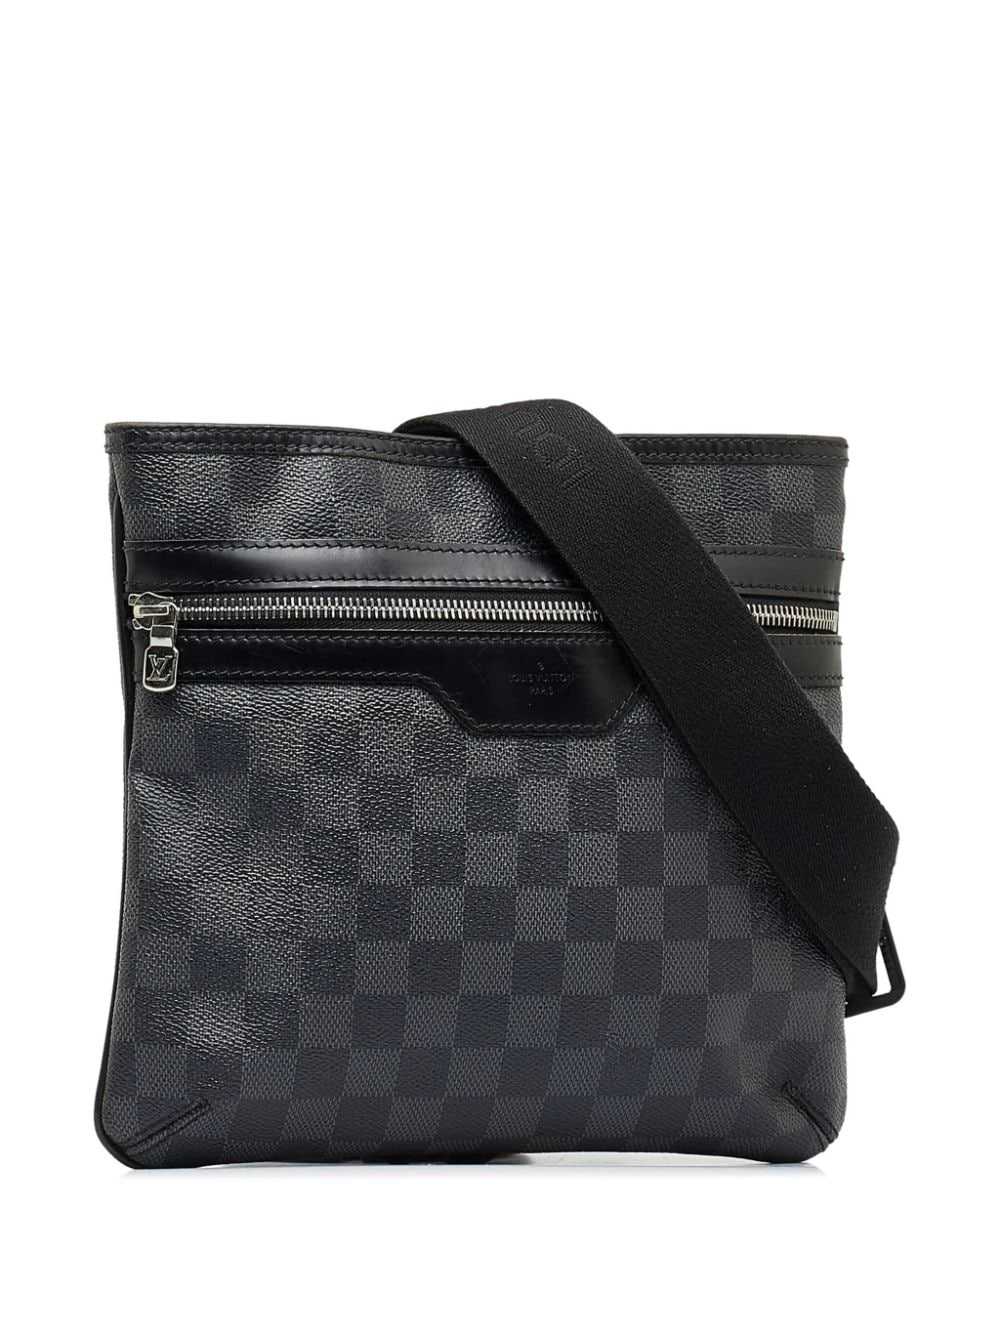 Louis Vuitton Pre-Owned 2010 pre-owned Damier Gra… - image 3